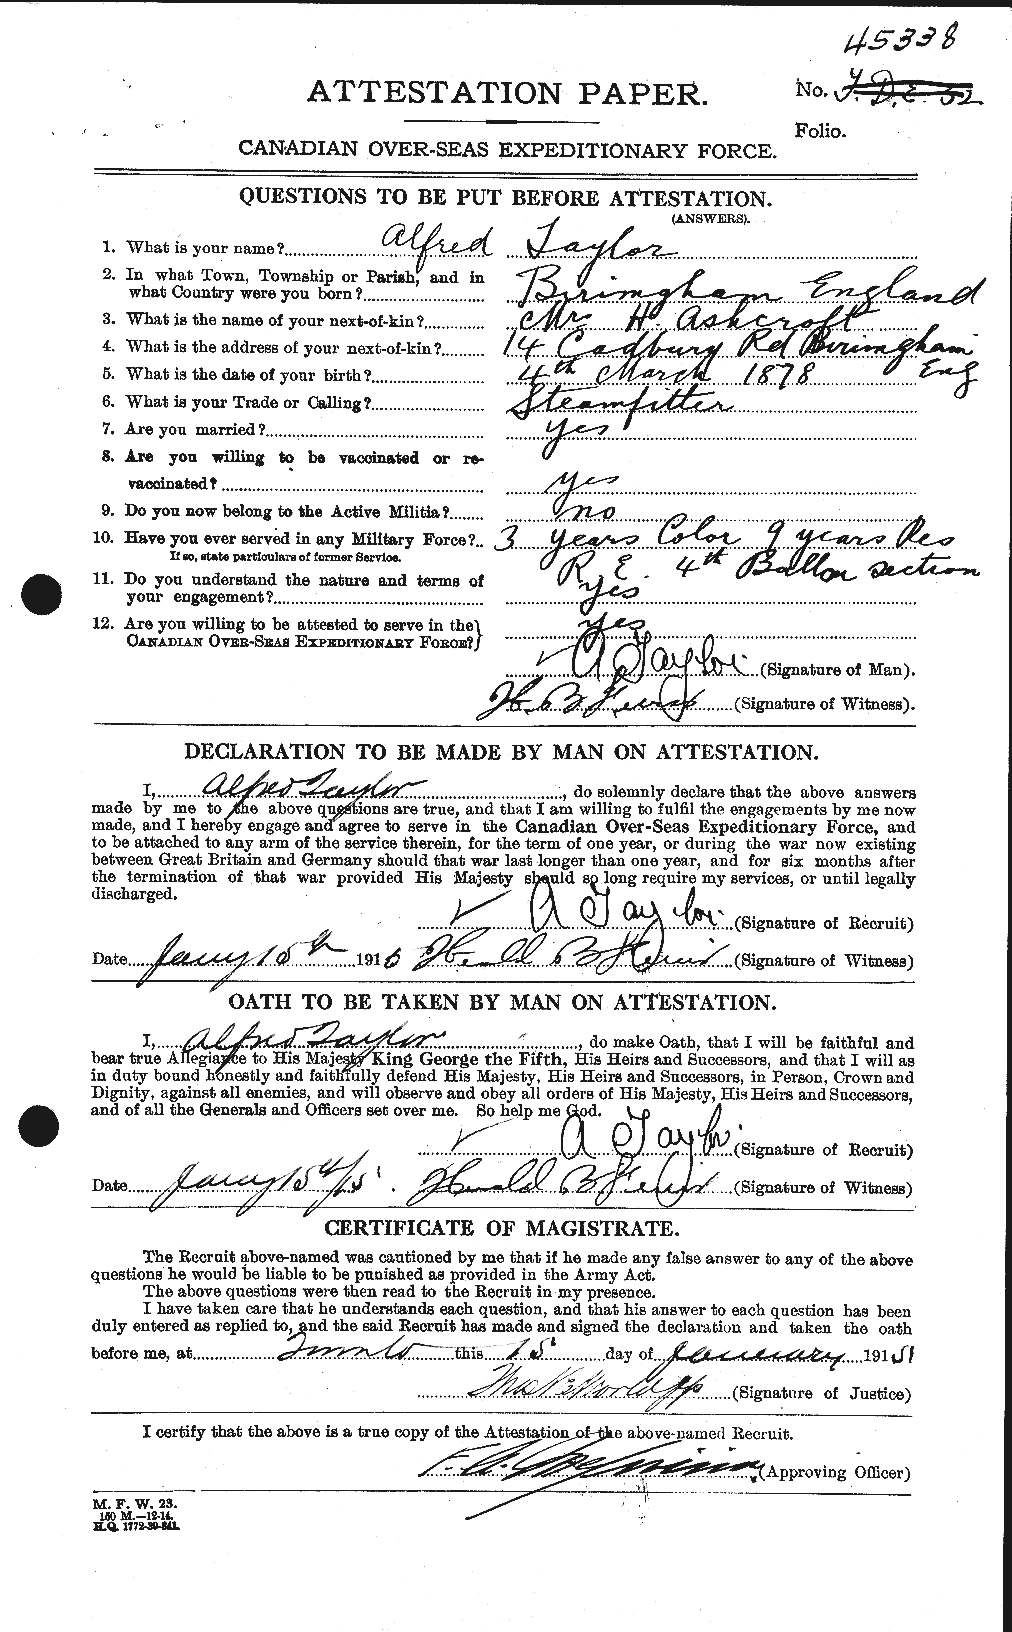 Personnel Records of the First World War - CEF 626162a